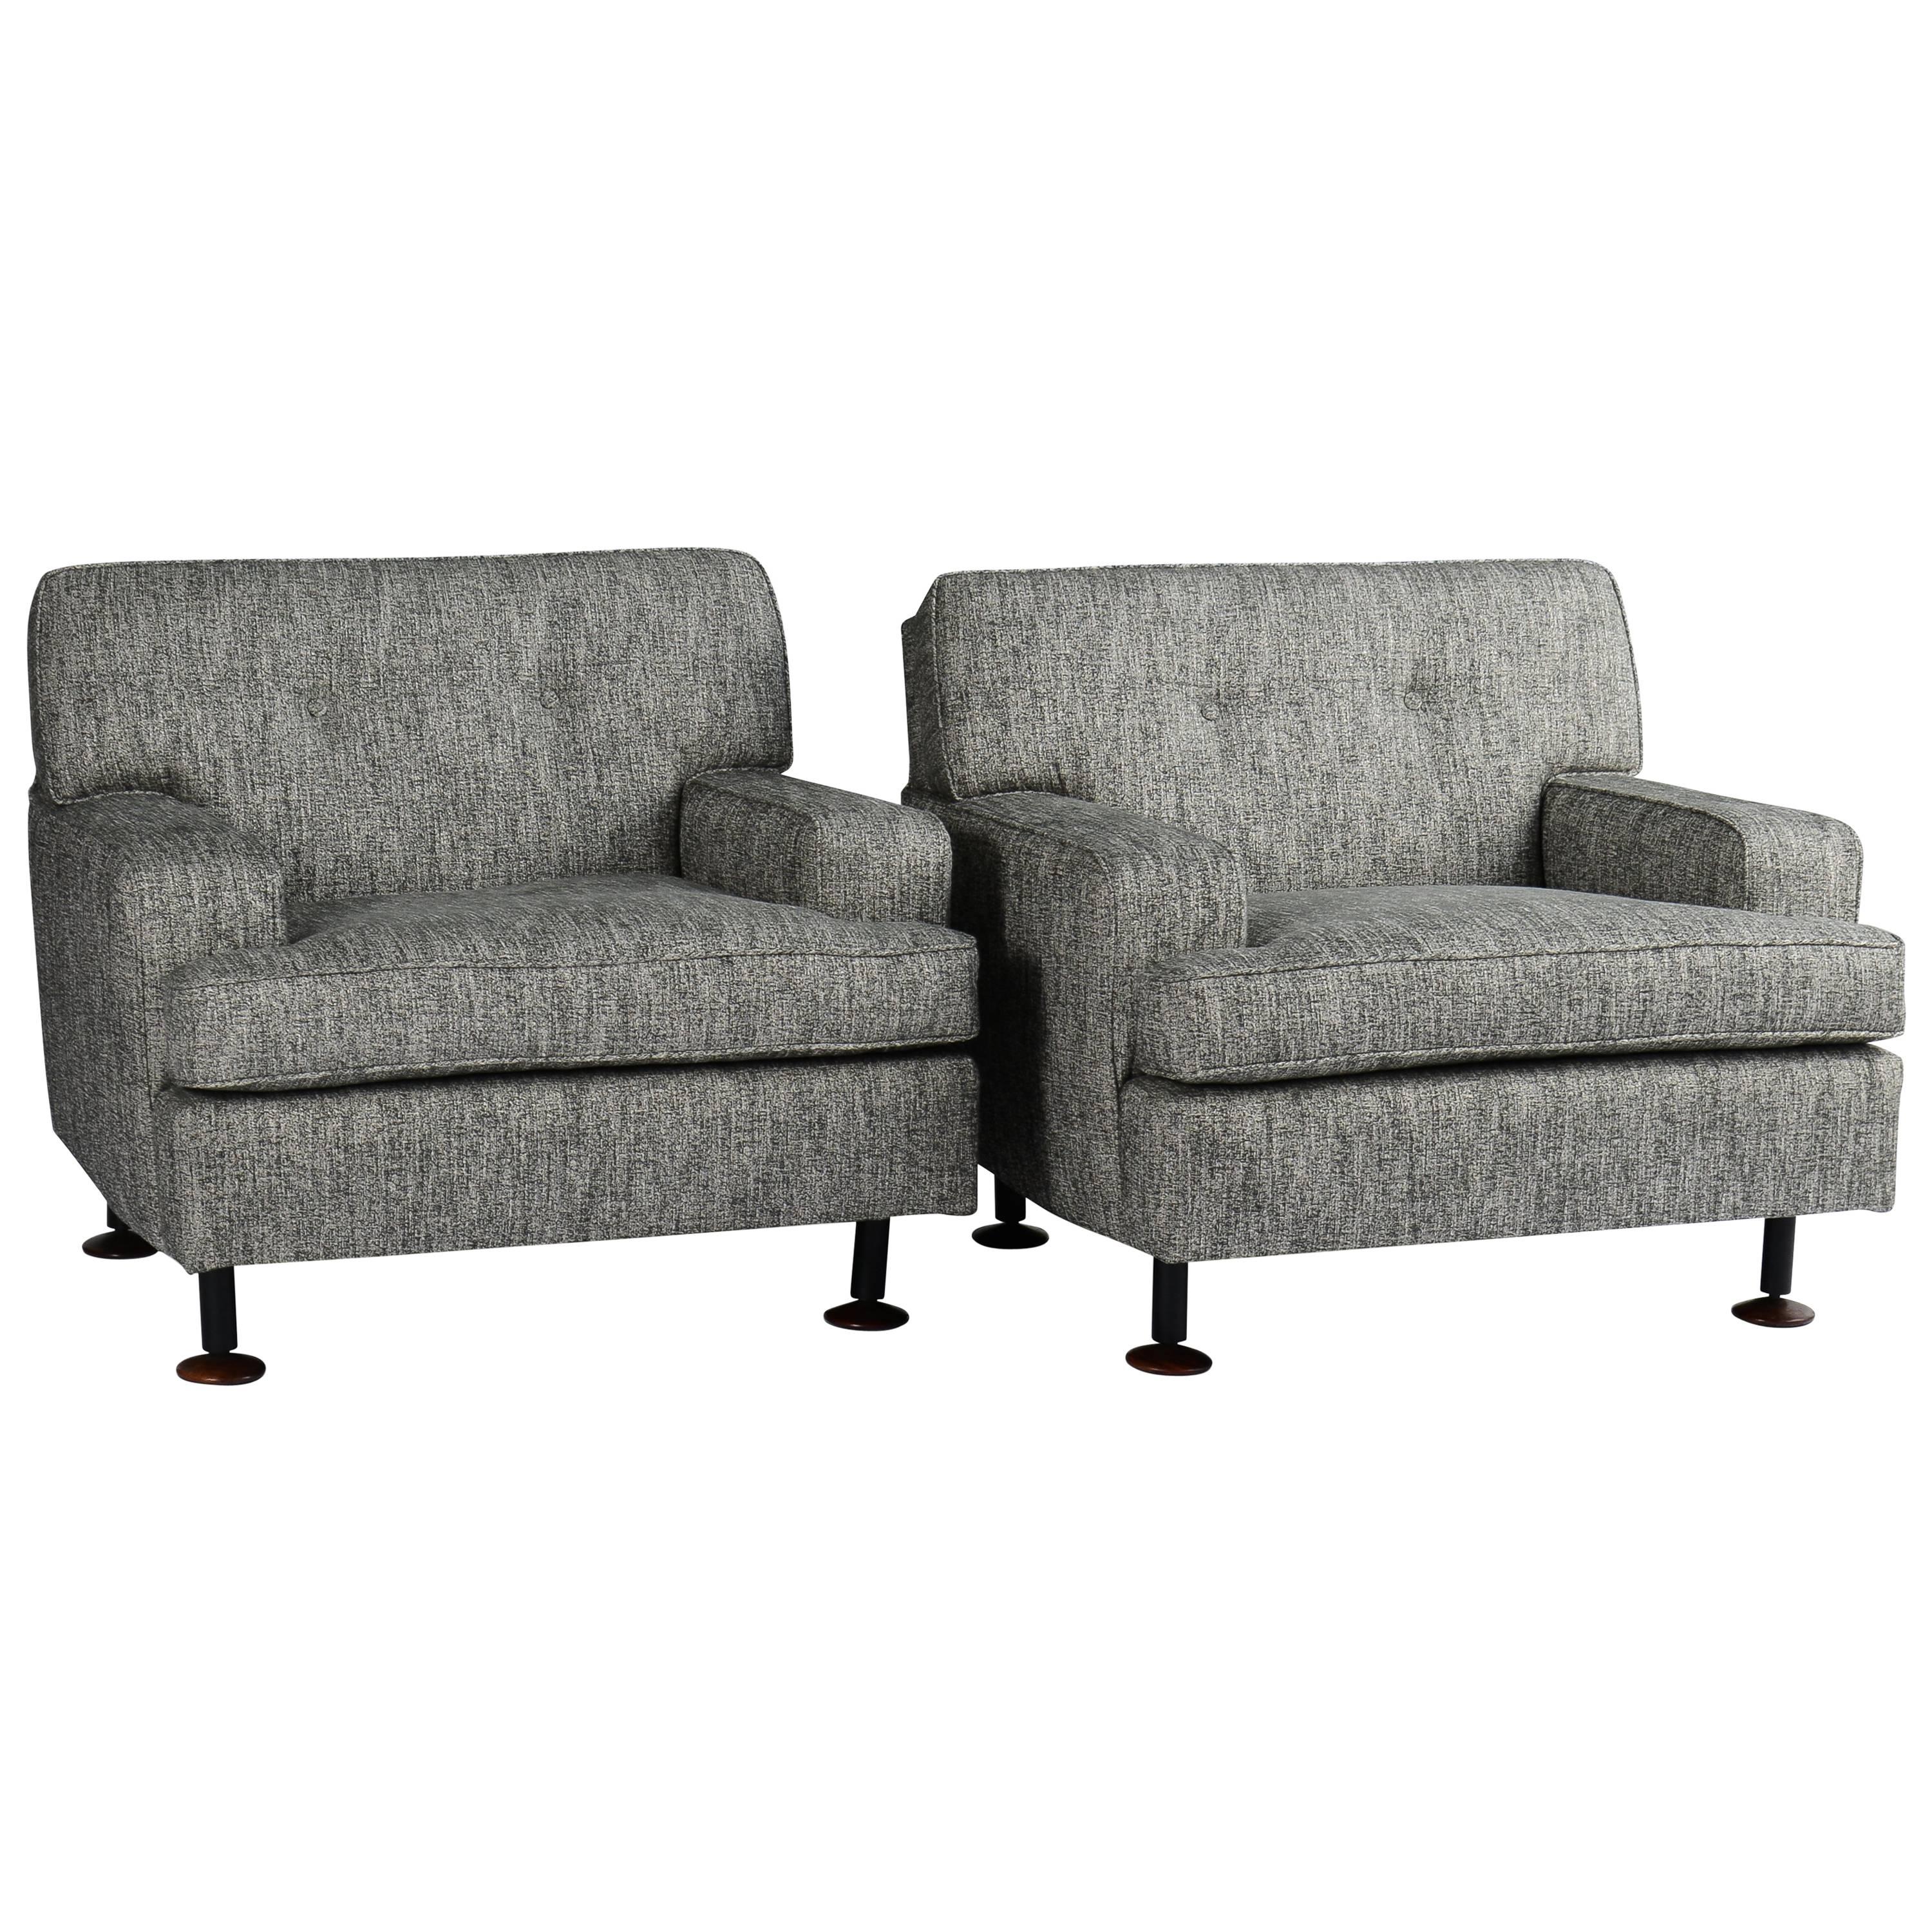 Pair of "Square" Chairs by Marco Zanuso for Airflex For Sale